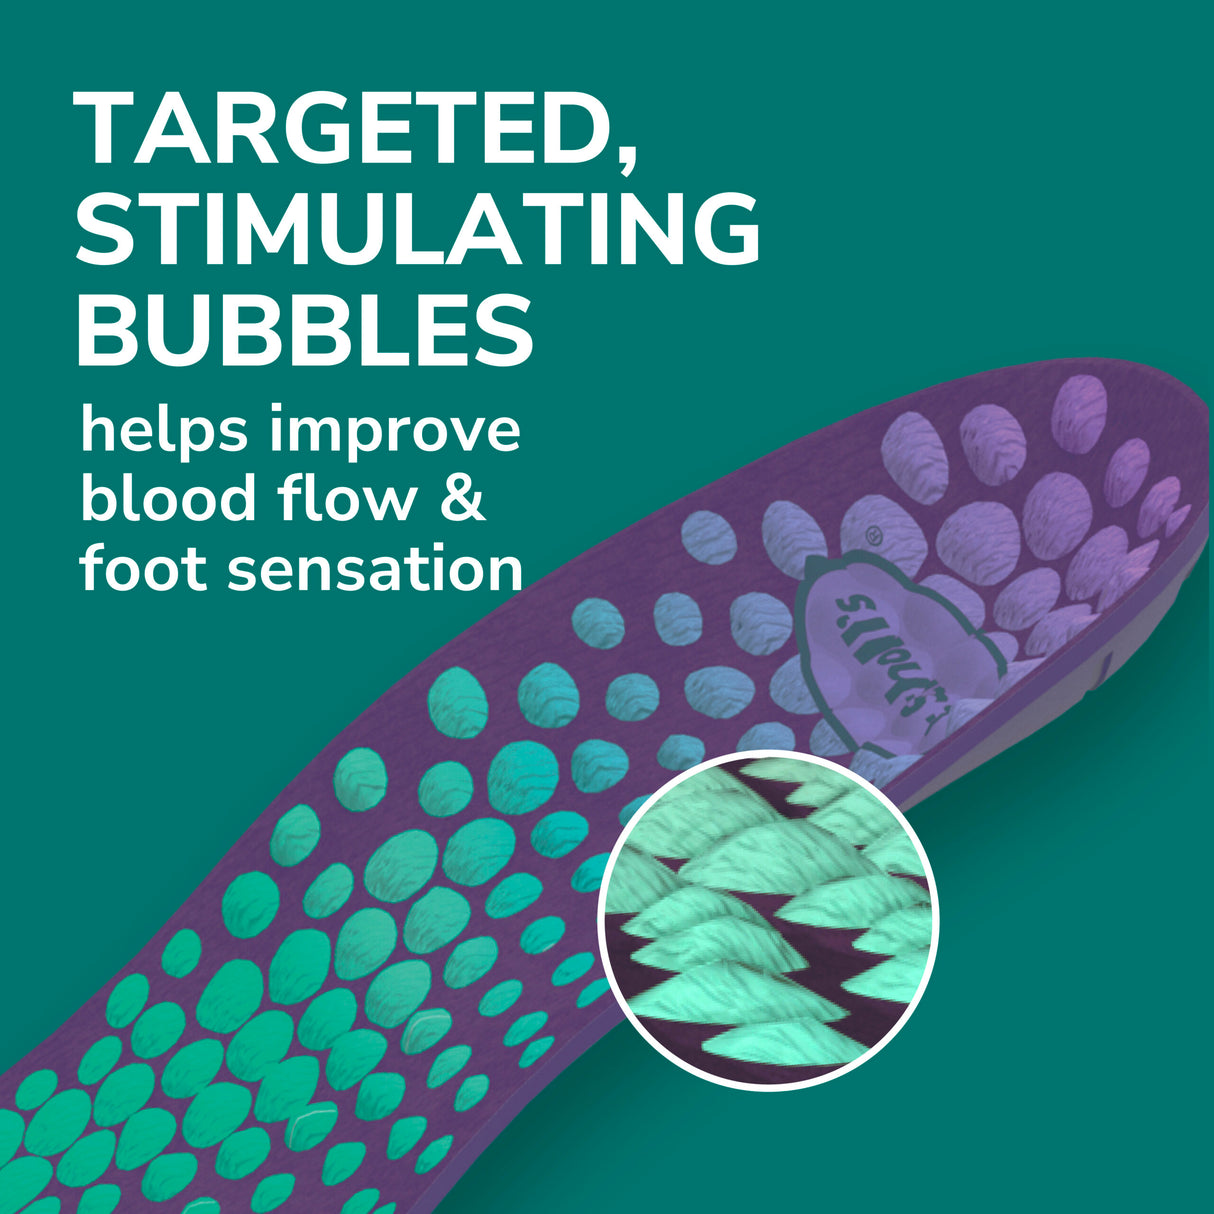 image of targeted, stimulating bubbles helps improve blood flow and foot sensation